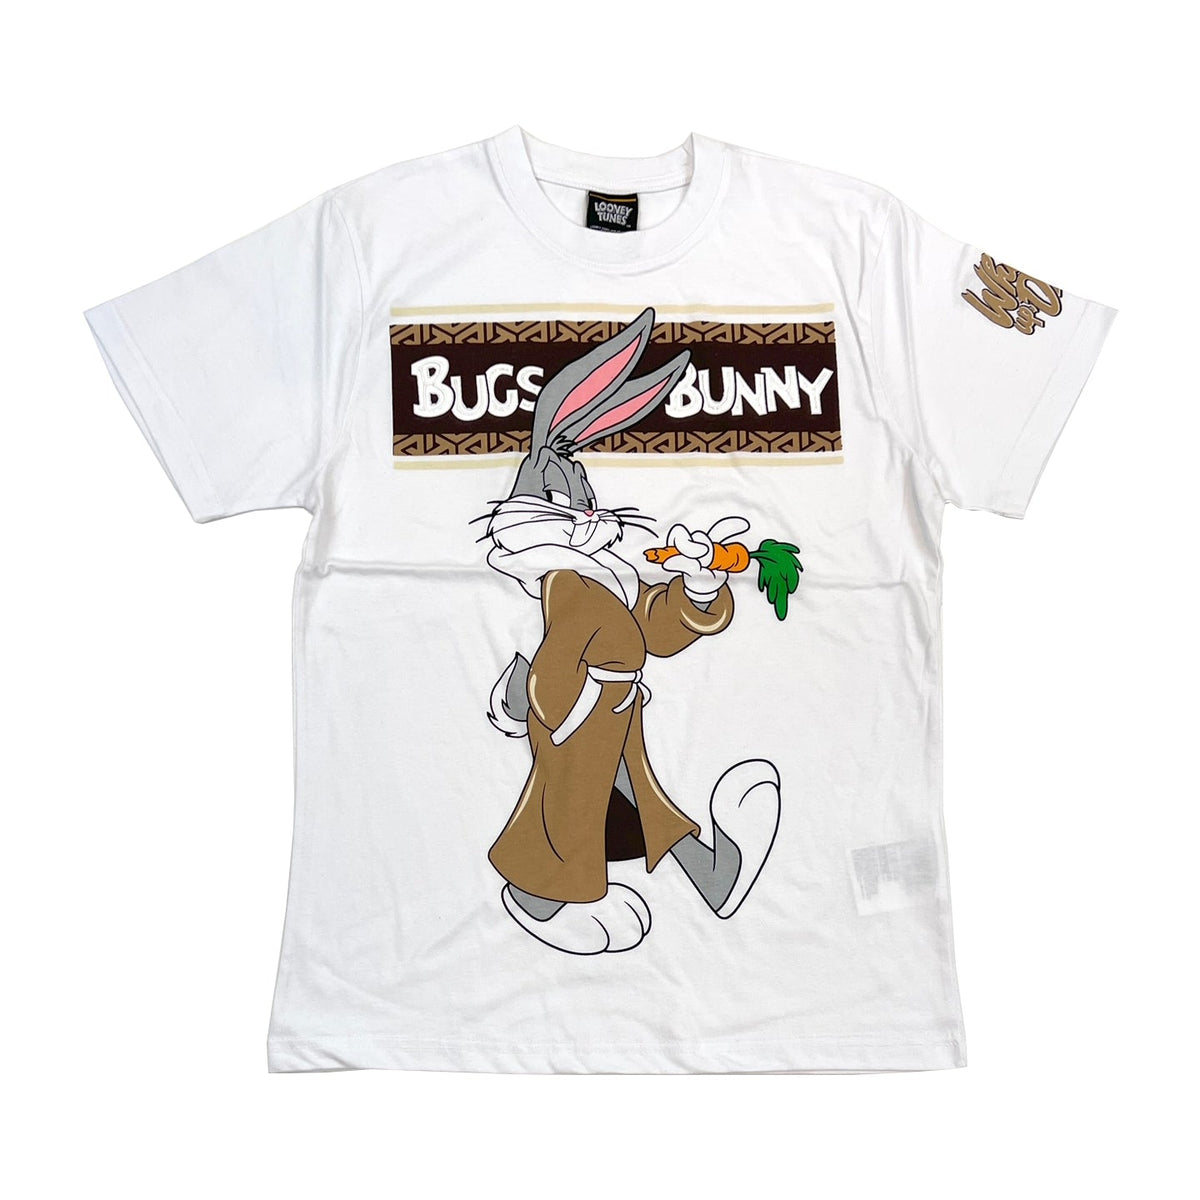 Looney $30 / 2 Tee Bugs Bunny $16.99 Tunes (White) for